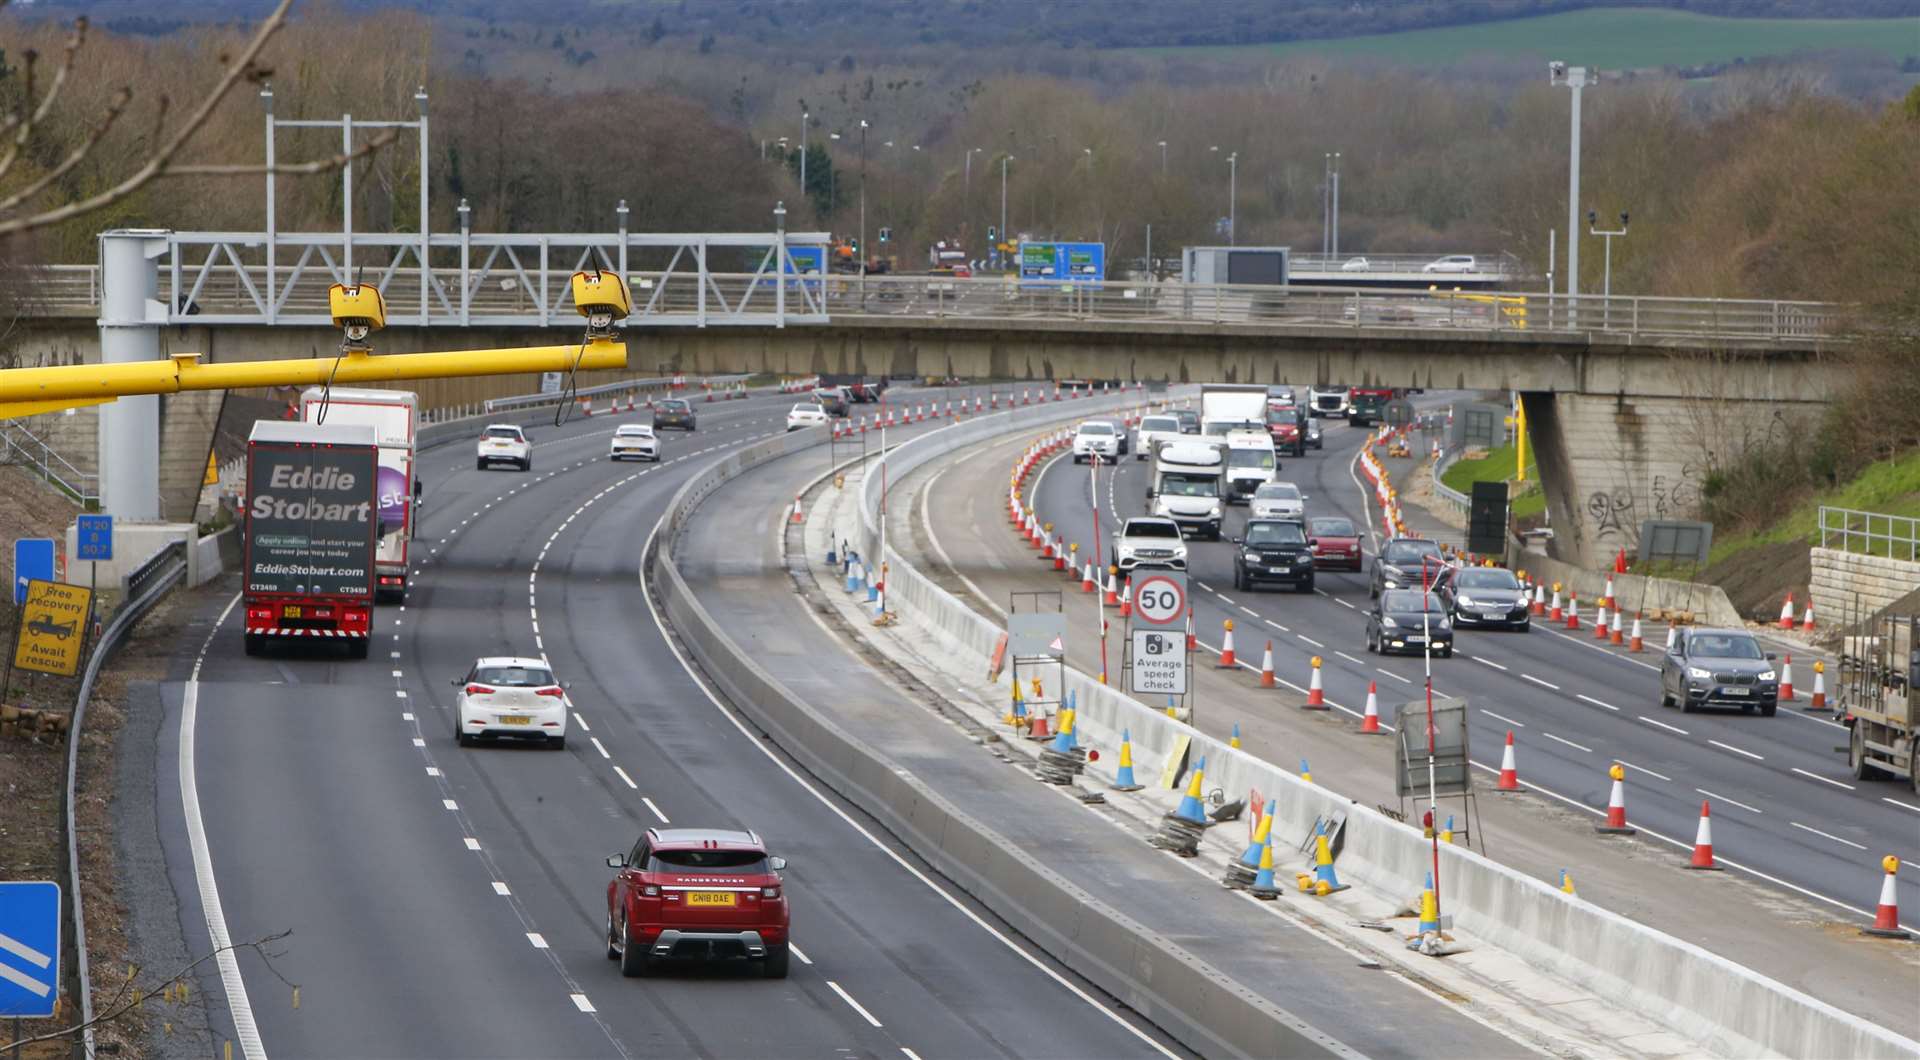 The Smart Motorway on the M20 between Junction 5 and 4 when works were ongoing. Picture: Andy Jones